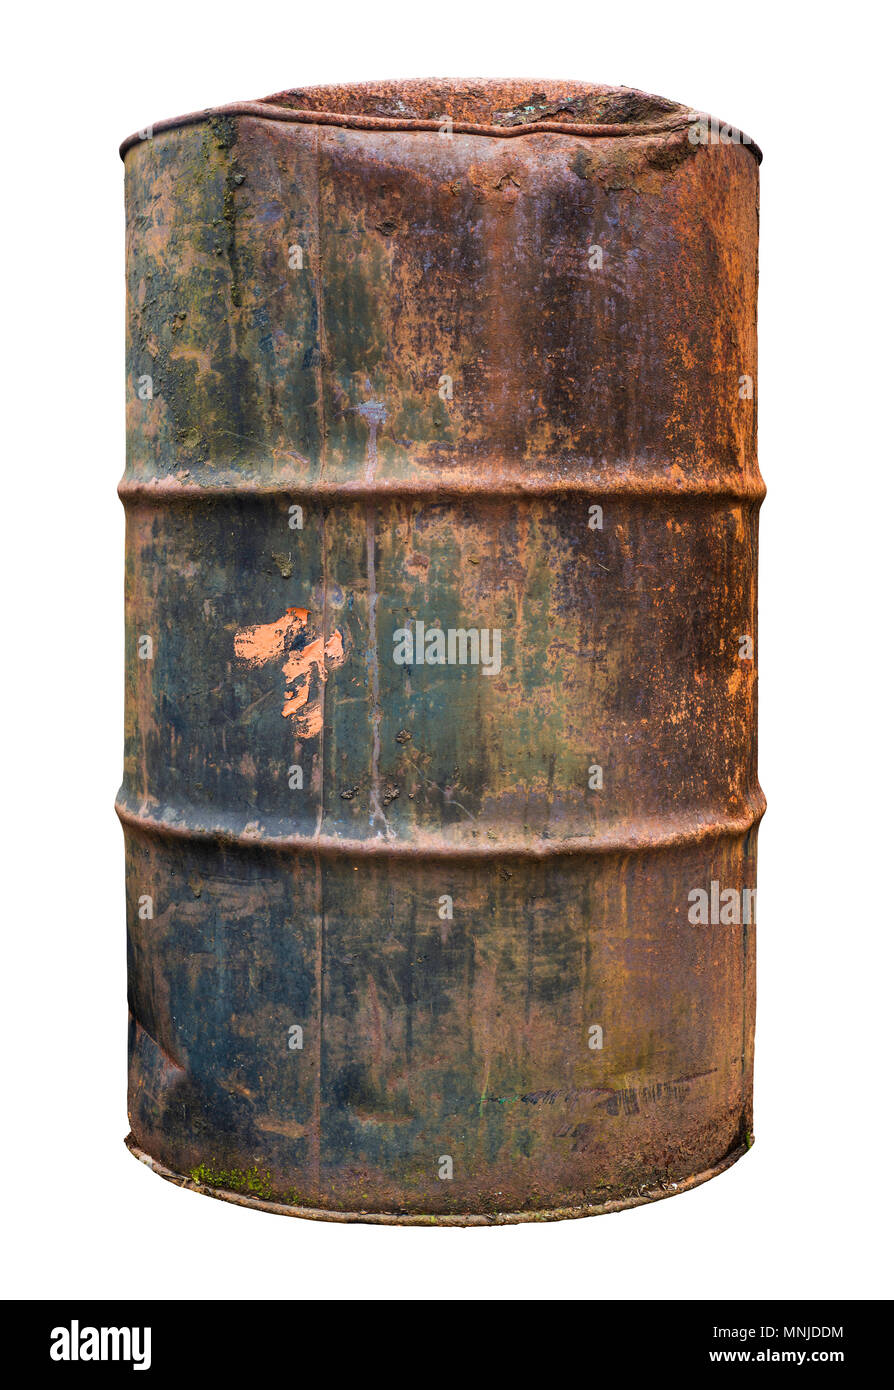 An Isolated Rusty Old Oil Barrel Or Drum On A White Background Stock Photo